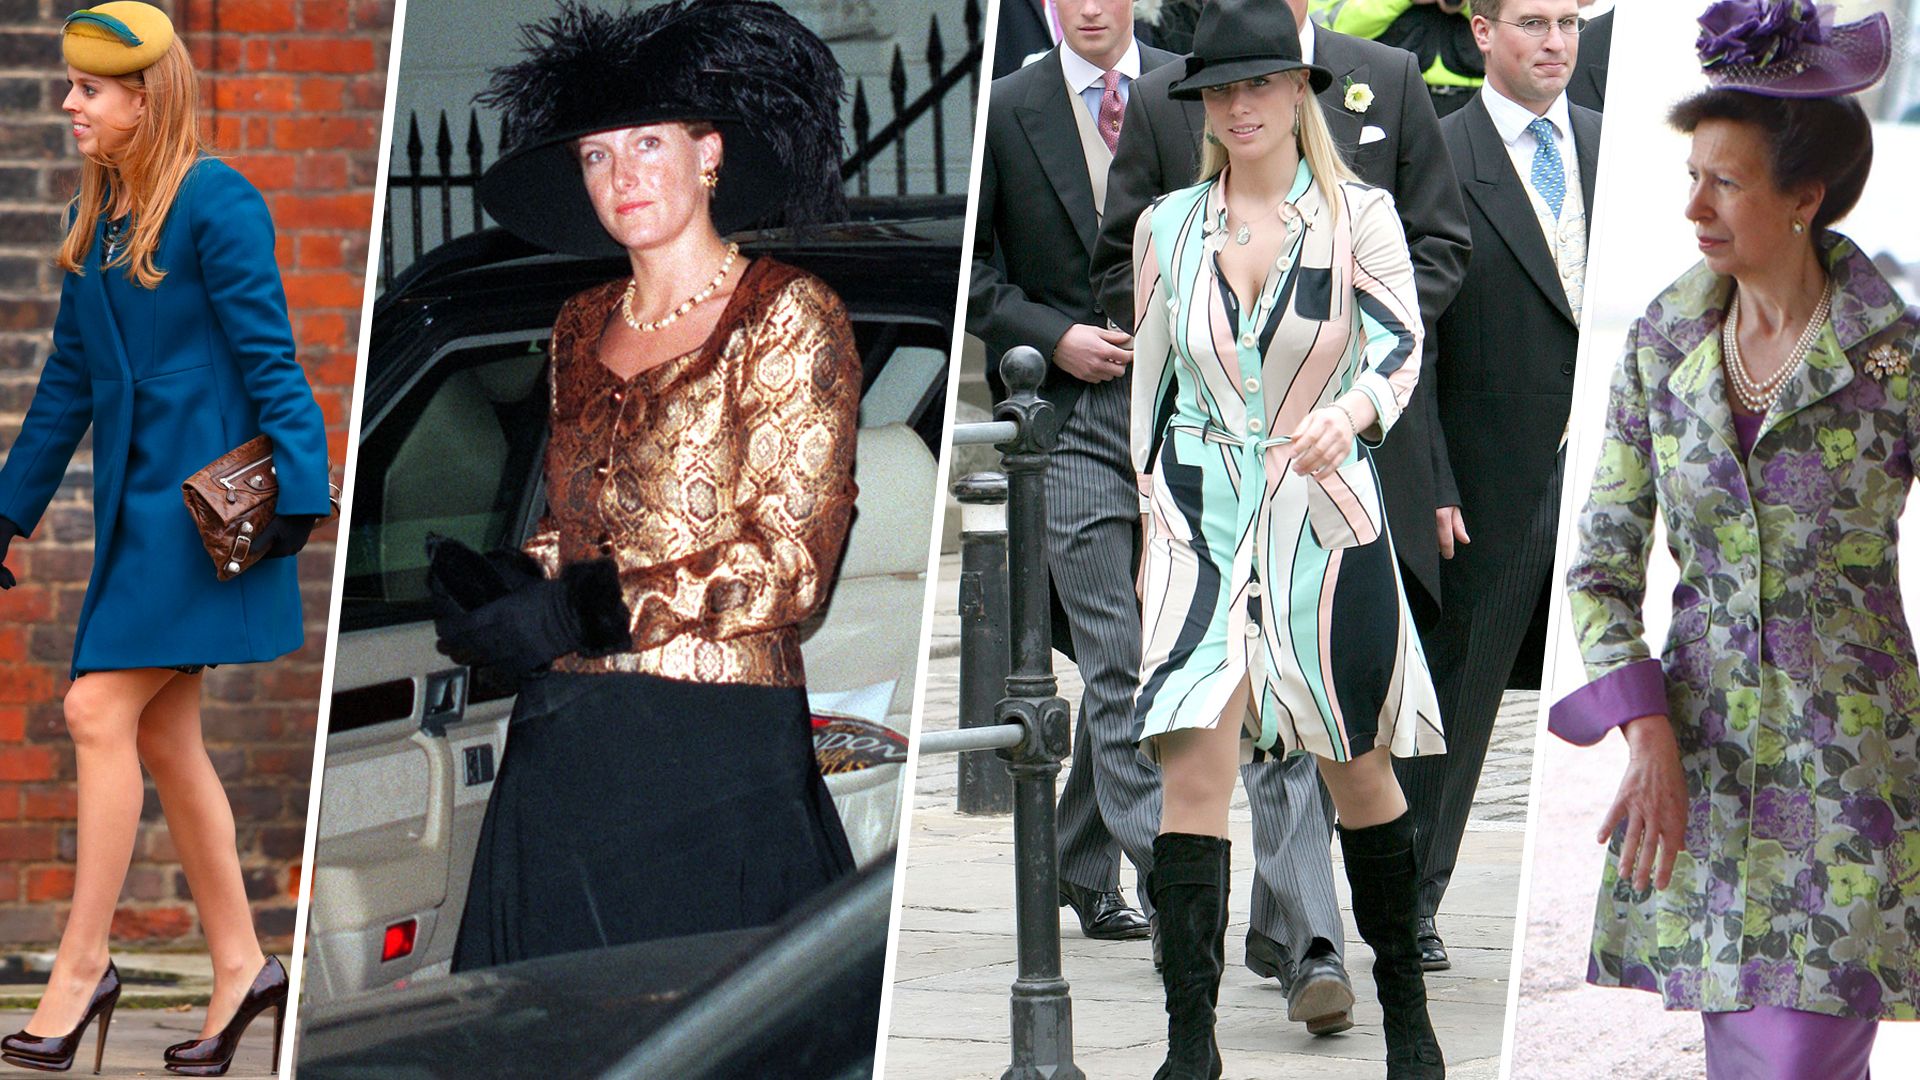 Princess Beatrice, Duchess Sophie, Zara Tindall and Princess Anne in wedding guest outfits